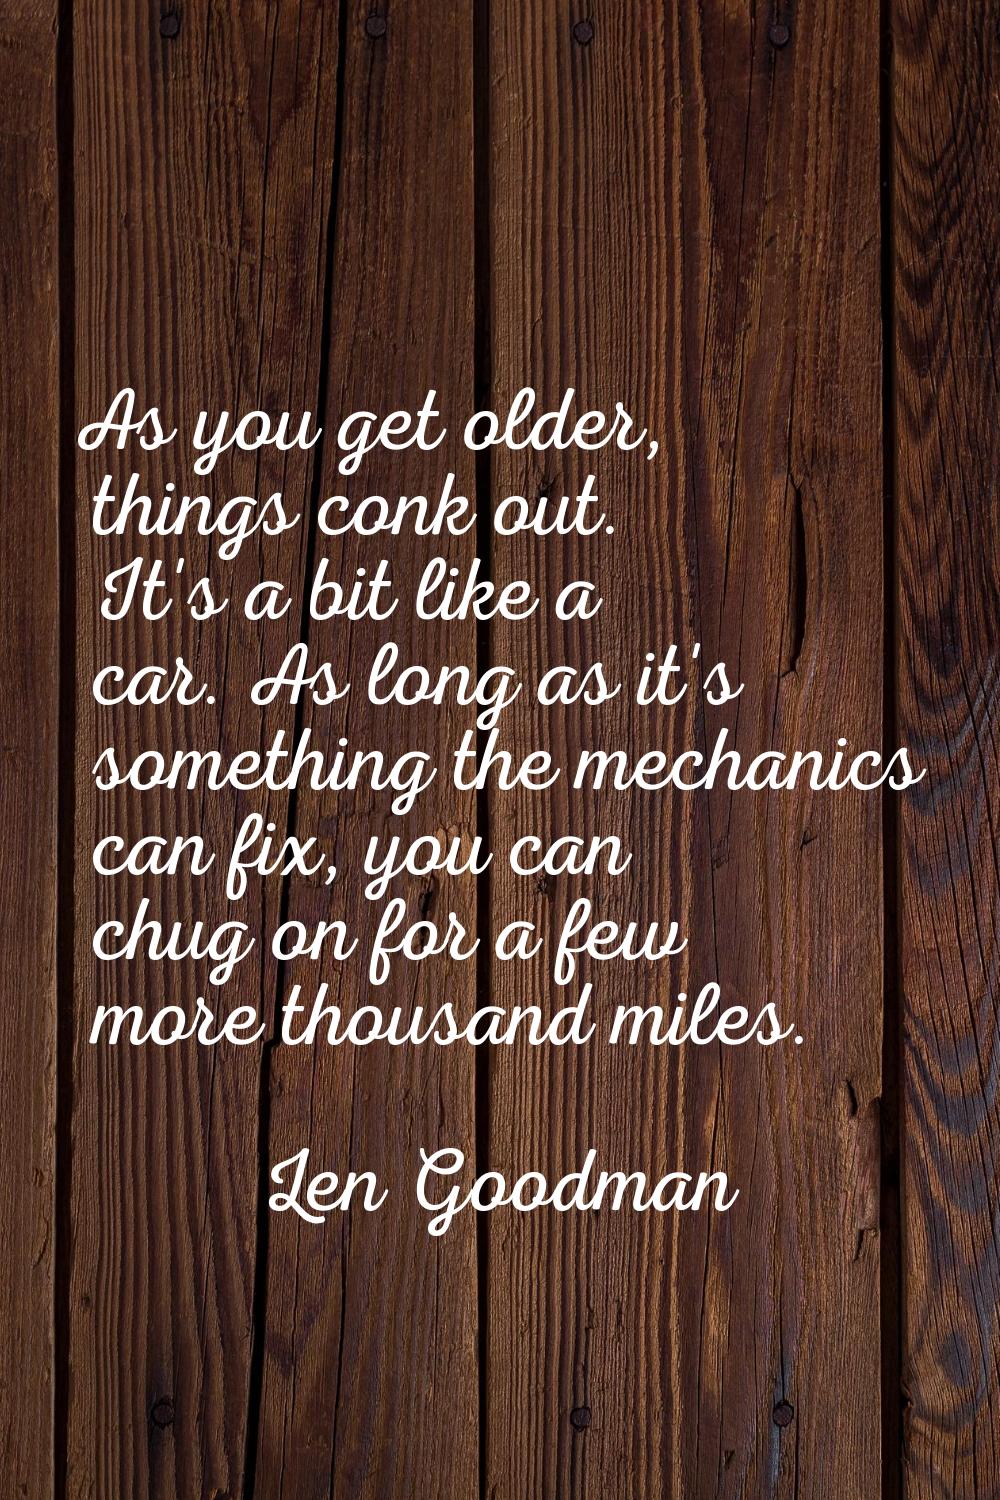 As you get older, things conk out. It's a bit like a car. As long as it's something the mechanics c